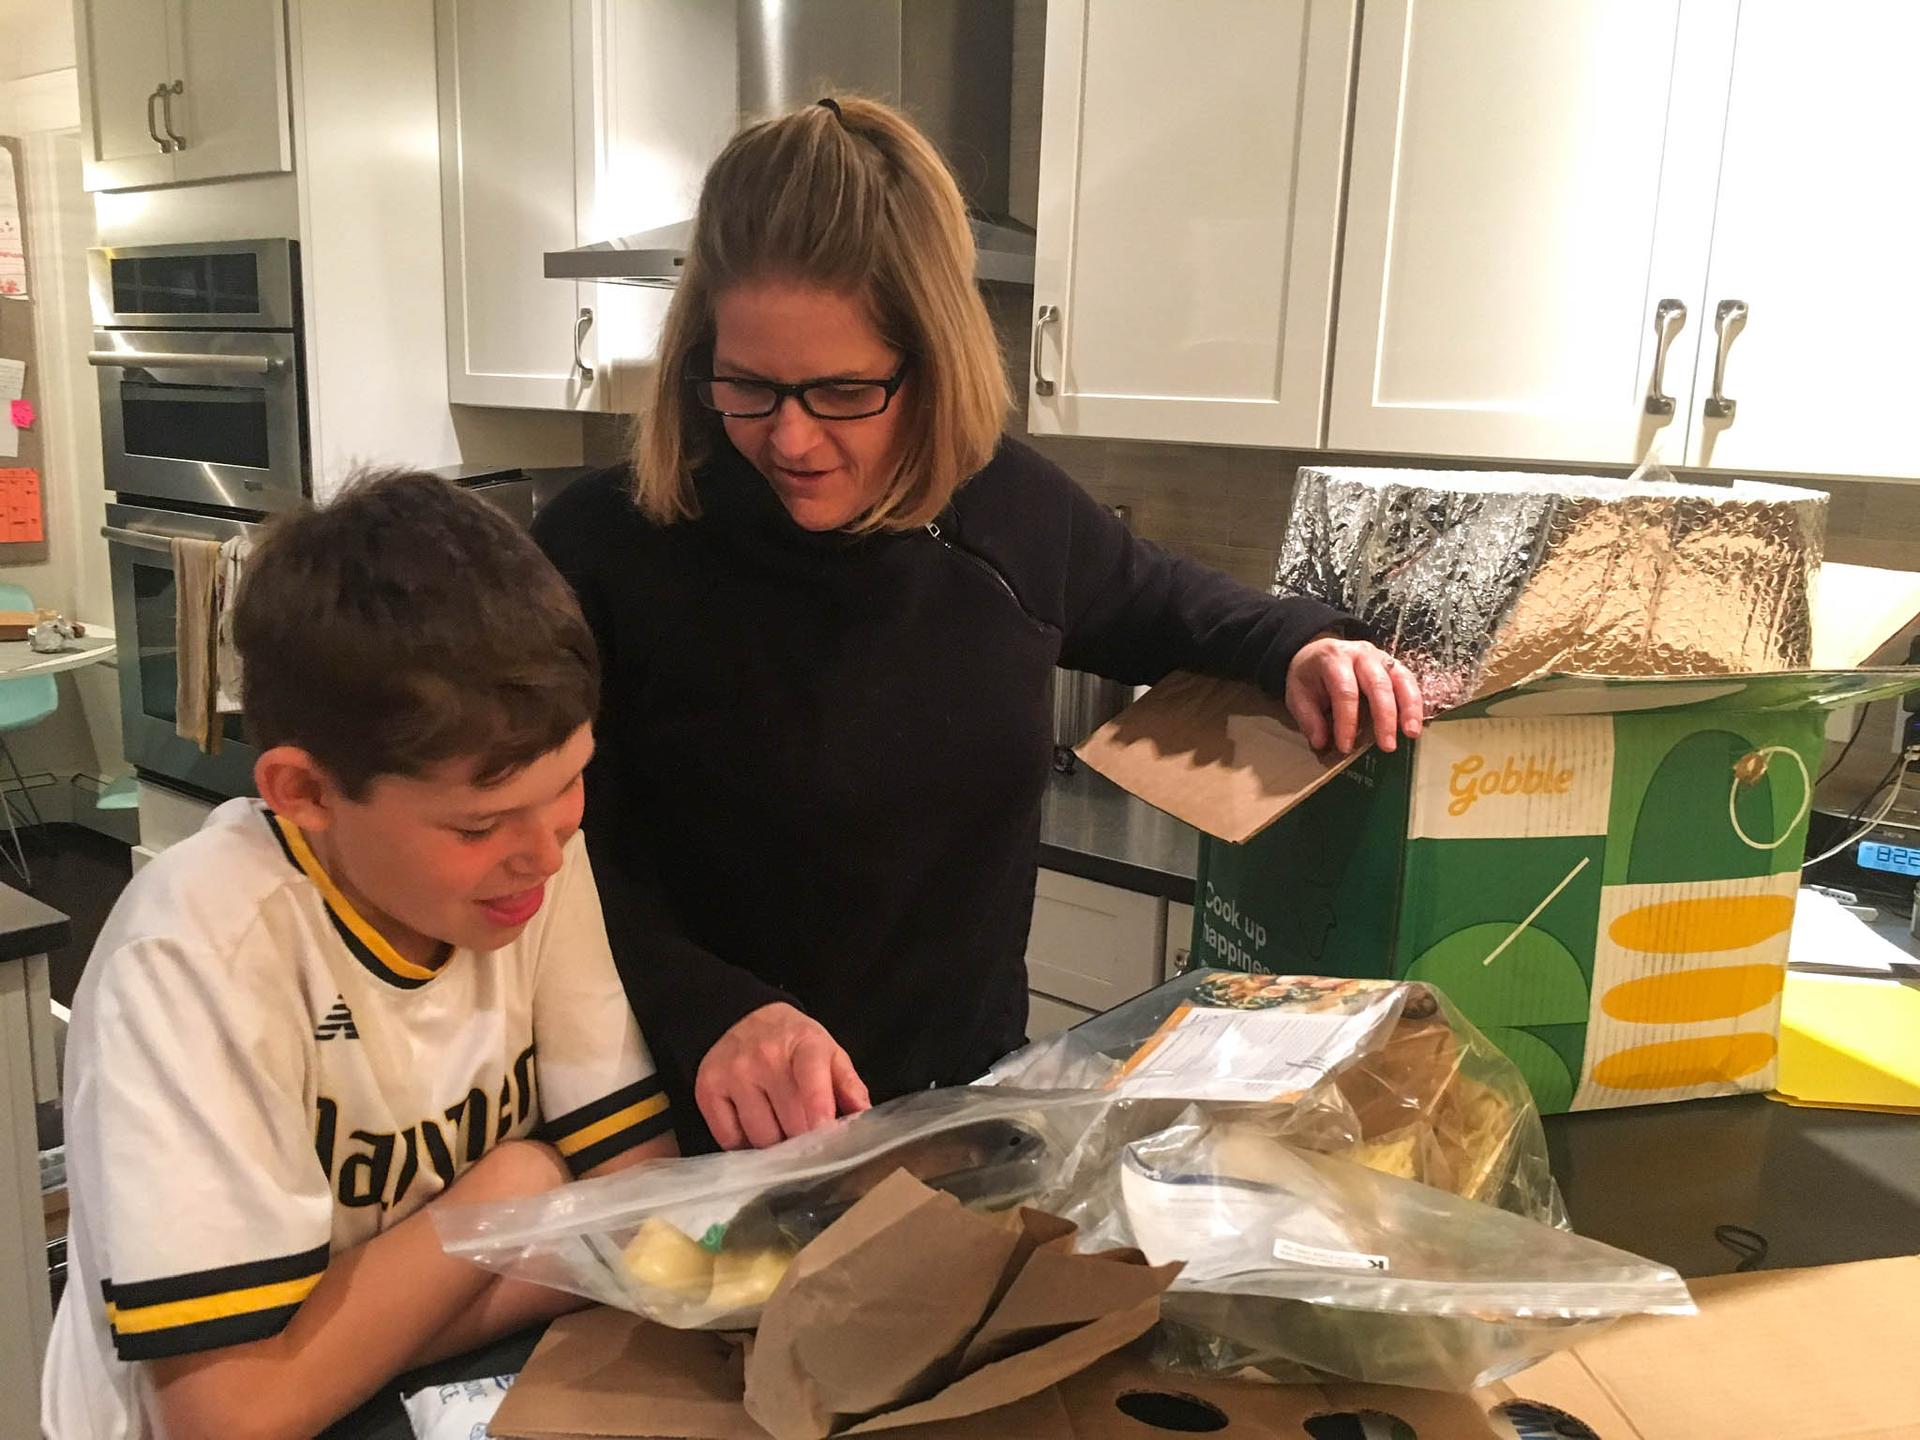 Wednesdays are a big deal when our meal kit arrives. For my son, Charley, and wife, Amy, it’s like unwrapping a present.